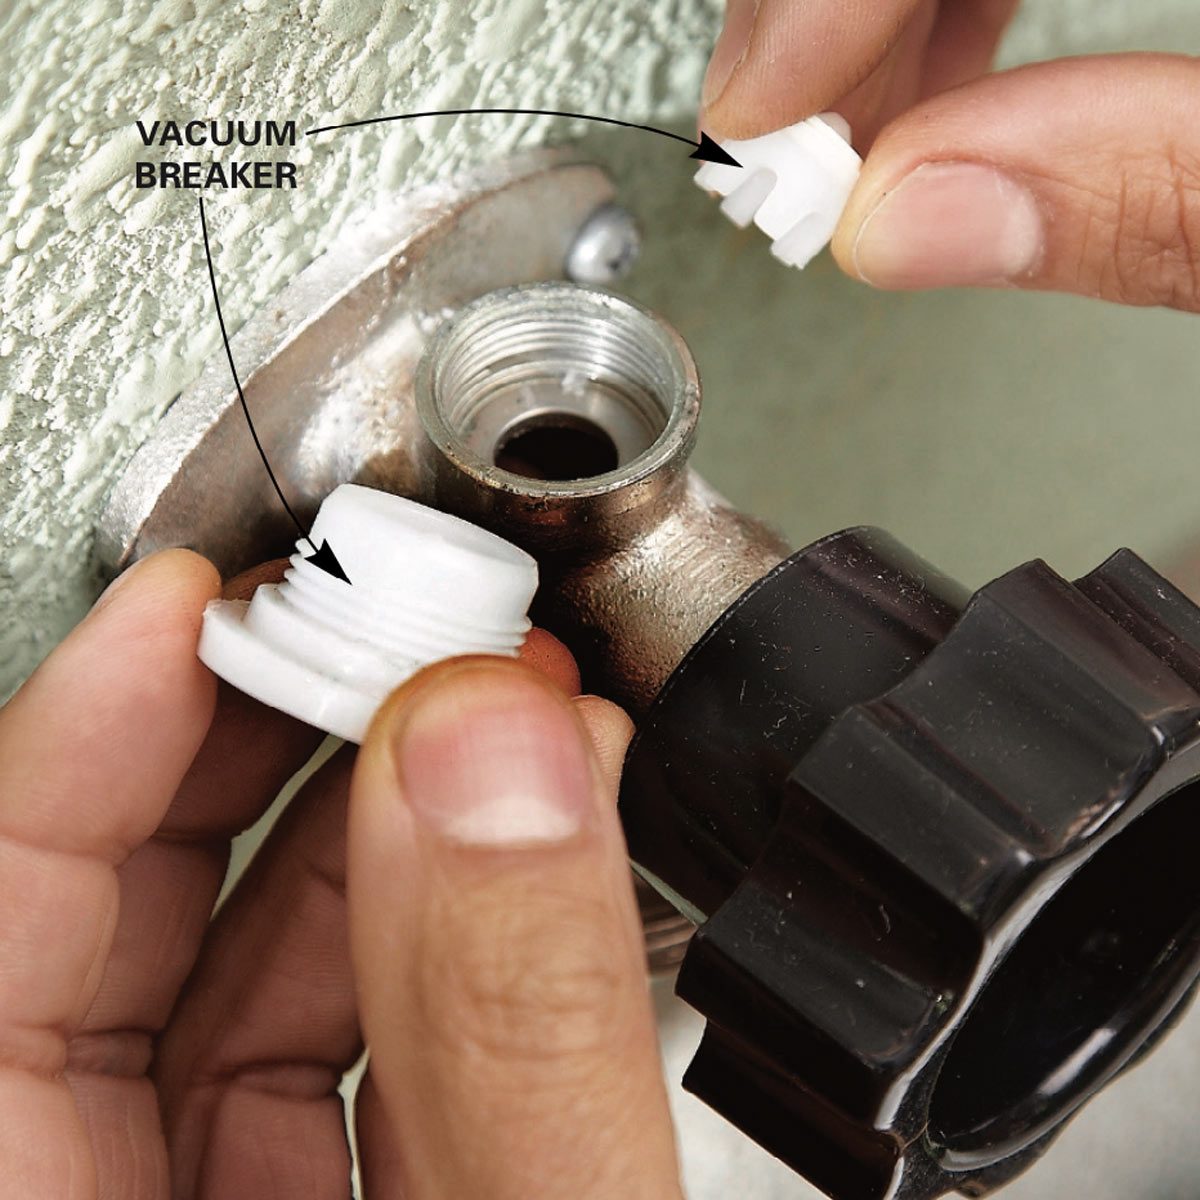 Fix A Leaking Frost Proof Faucet Family Handyman